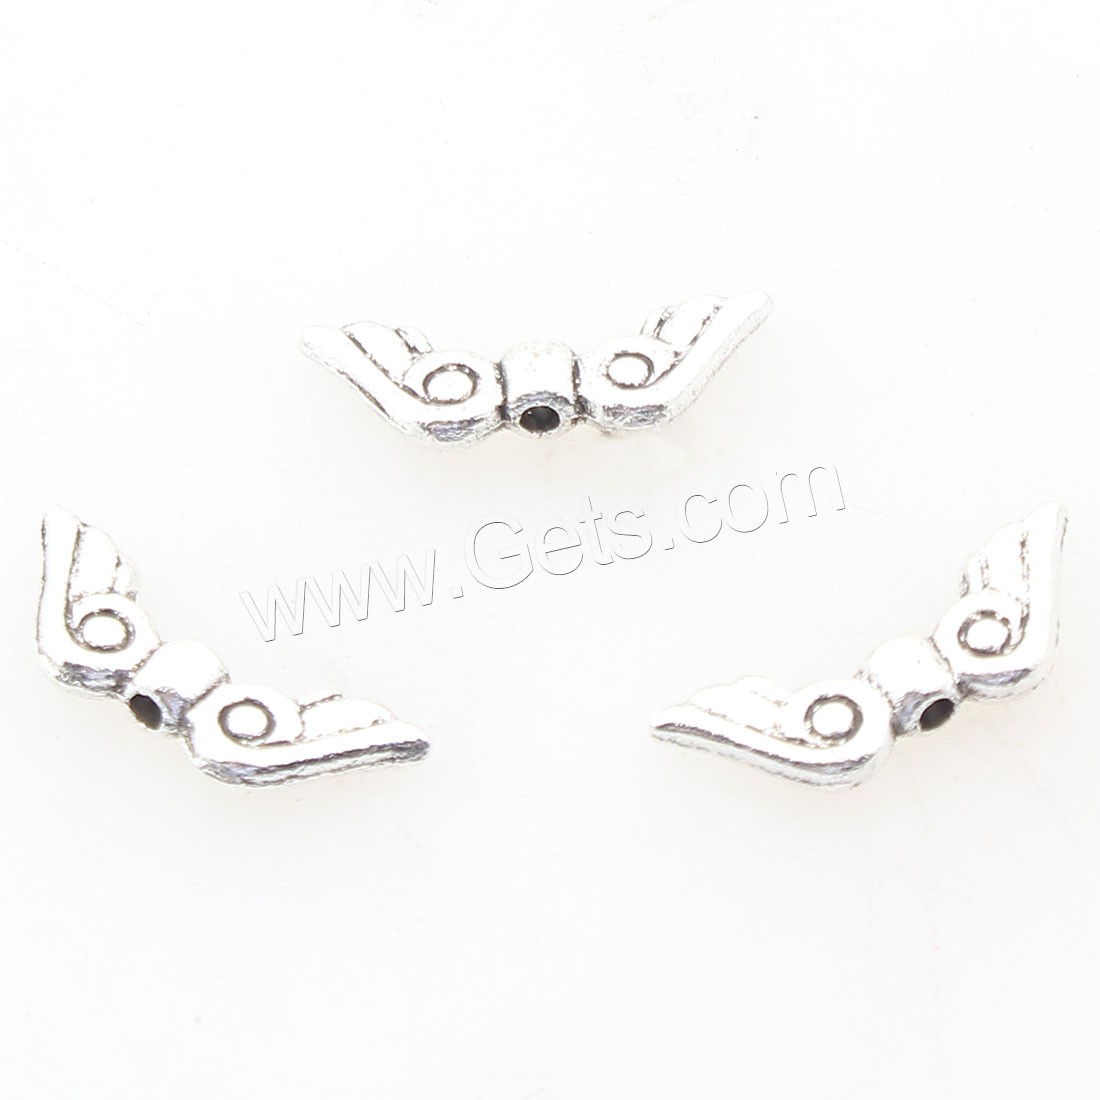 Zinc Alloy Jewelry Beads, antique silver color plated, 6x15mm, Hole:Approx 1mm, Approx 1190PCs/Bag, Sold By Bag